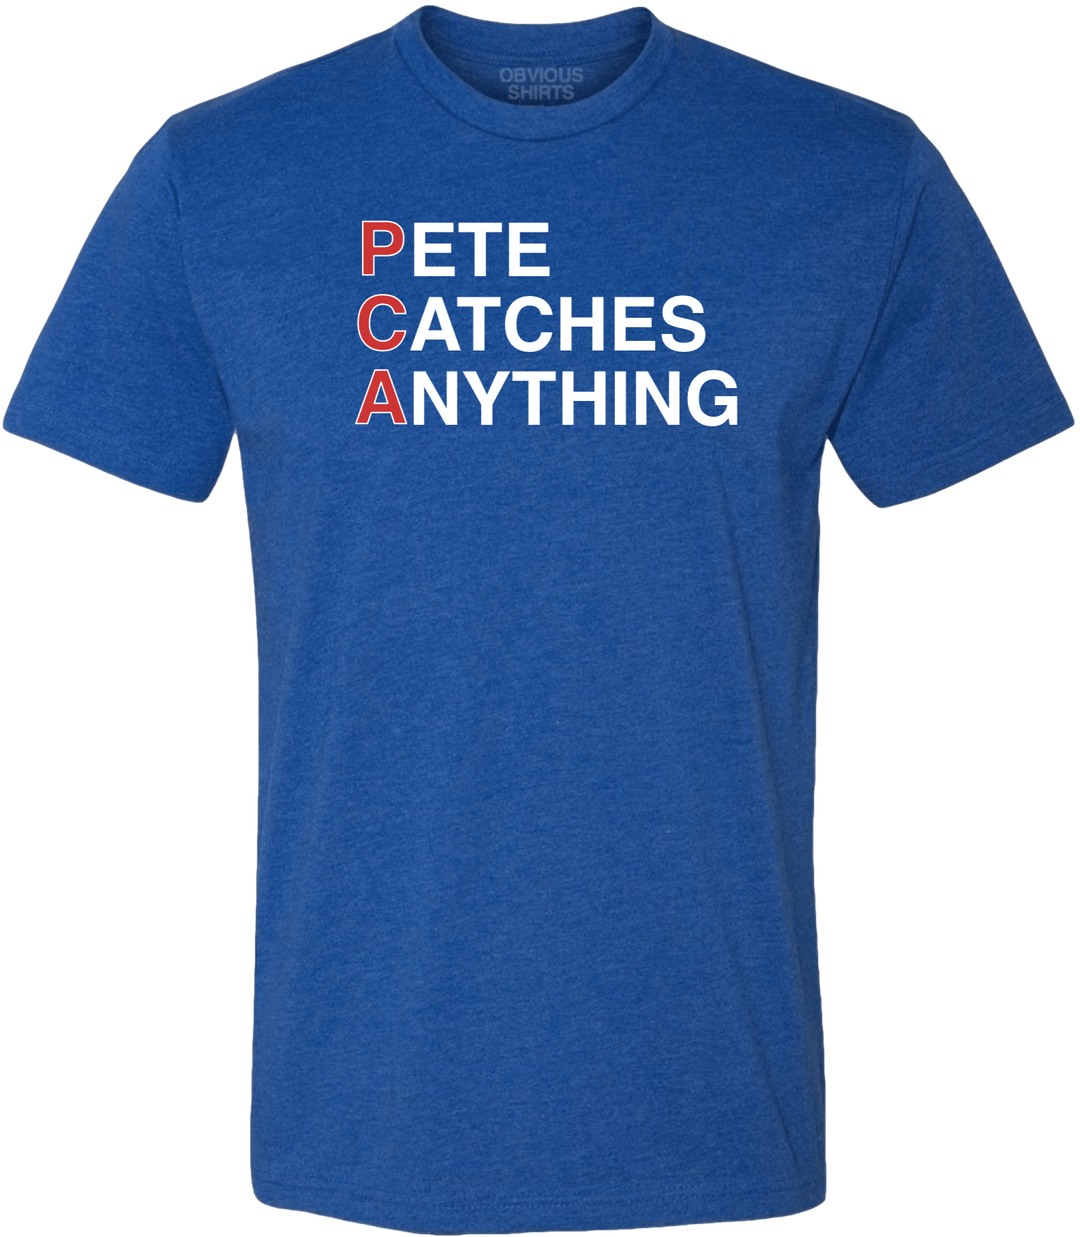 PCA: PETE CATCHES ANYTHING. - OBVIOUS SHIRTS